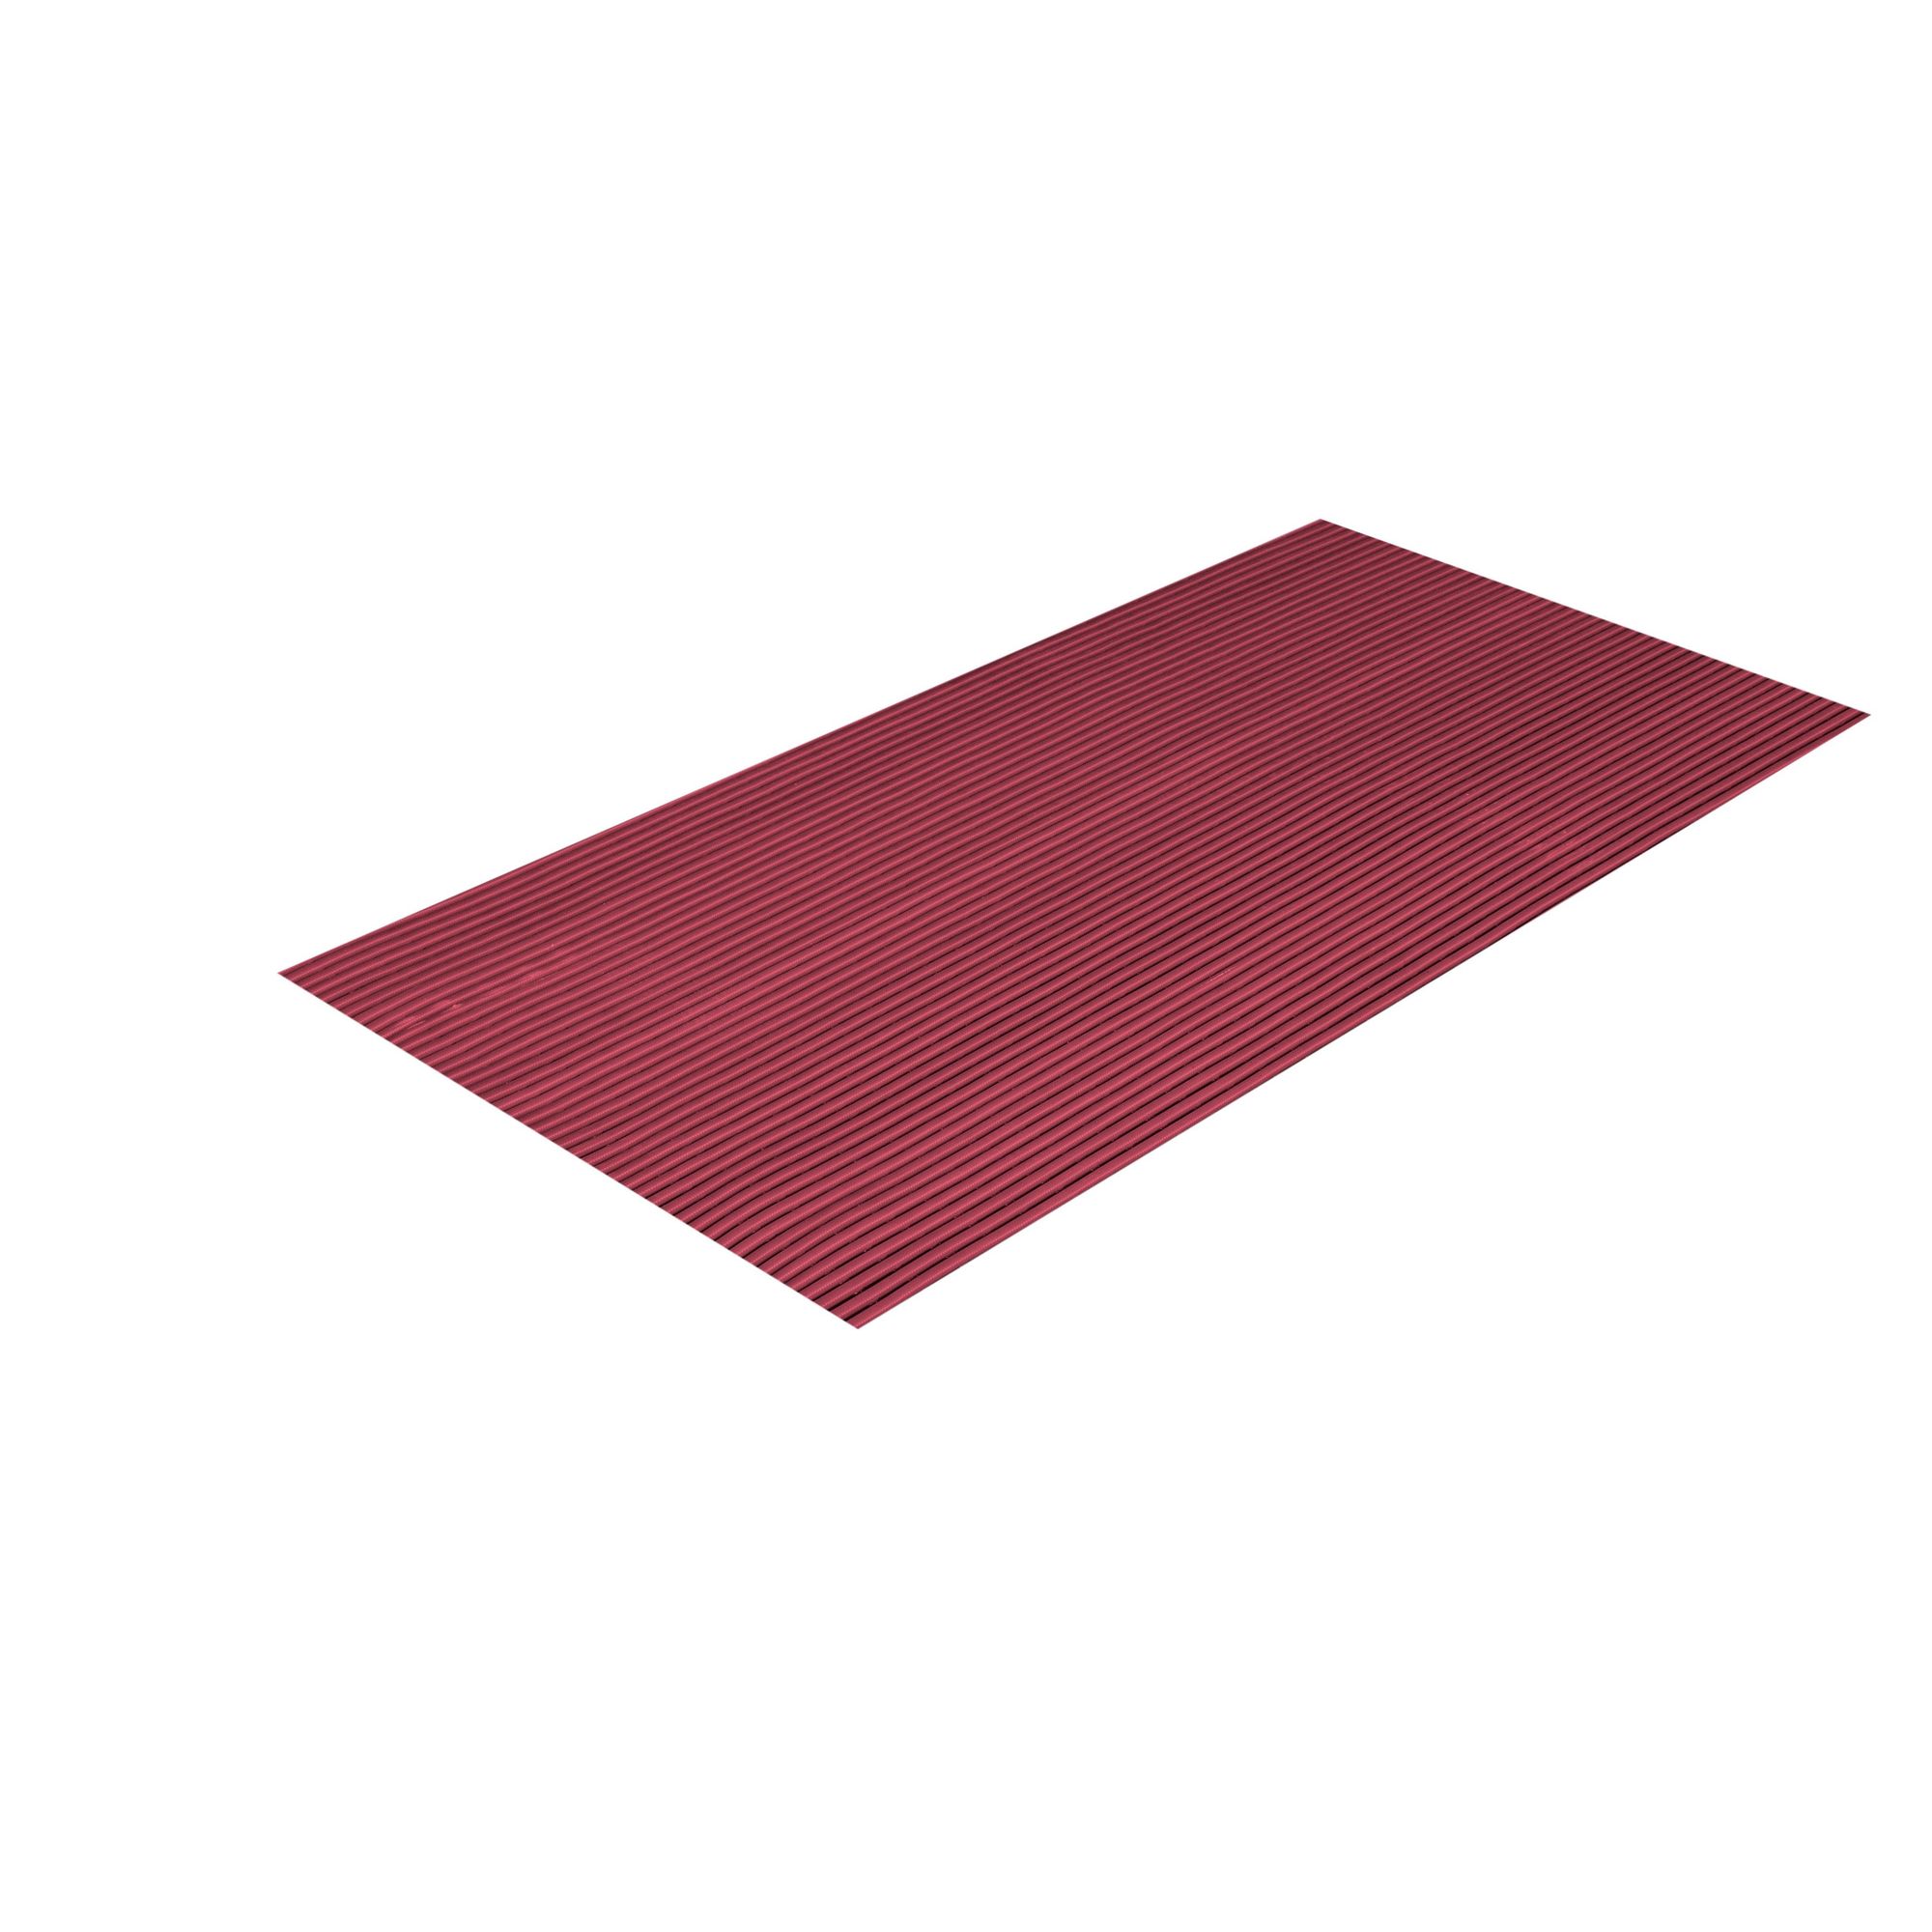 Crown Matting Technologies, Sani-Tred 4ft.x40ft. Mulberry Red, Width 48 in, Length 480 in, Thickness 15/32 in, Model HVR0048MR